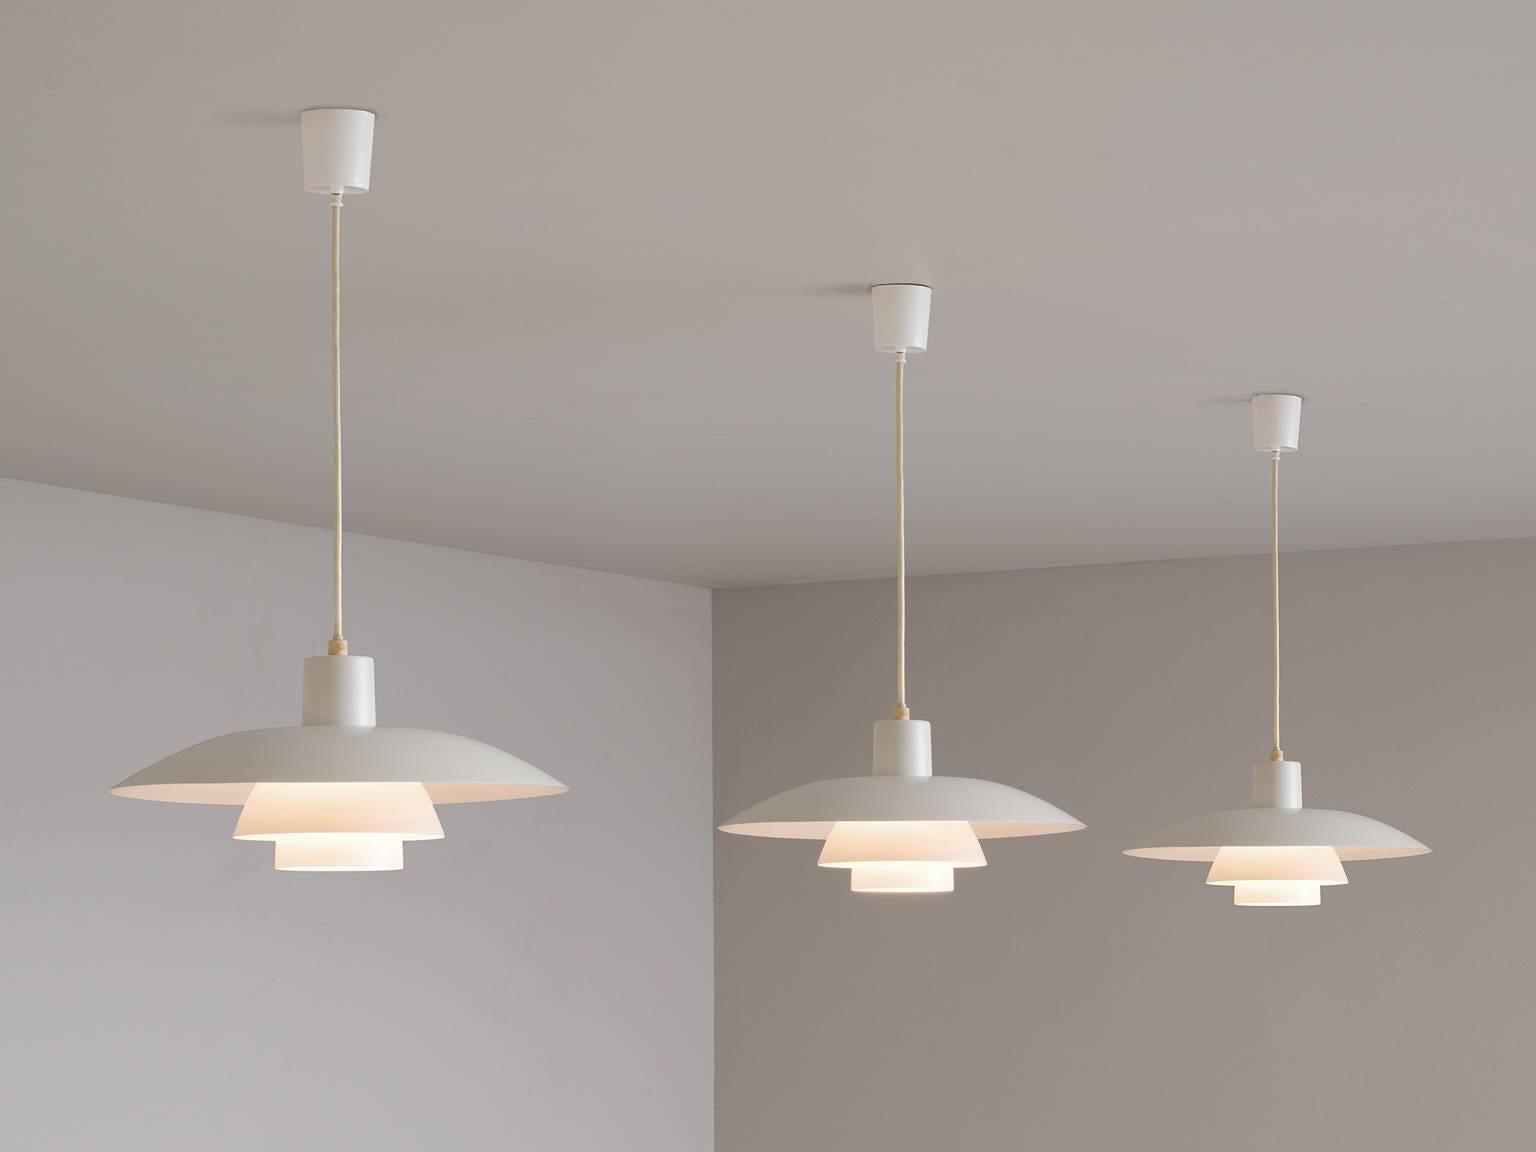 Set of 6 pendants model PH4/3 in metal by Poul Henningsen for Louis Poulsen, Denmark, 1950s.

Set of 6 iconic PH chandeliers designed by Poul Henningsen. Consisting of three curved shades of white coated metal. The spectator has no direct view on